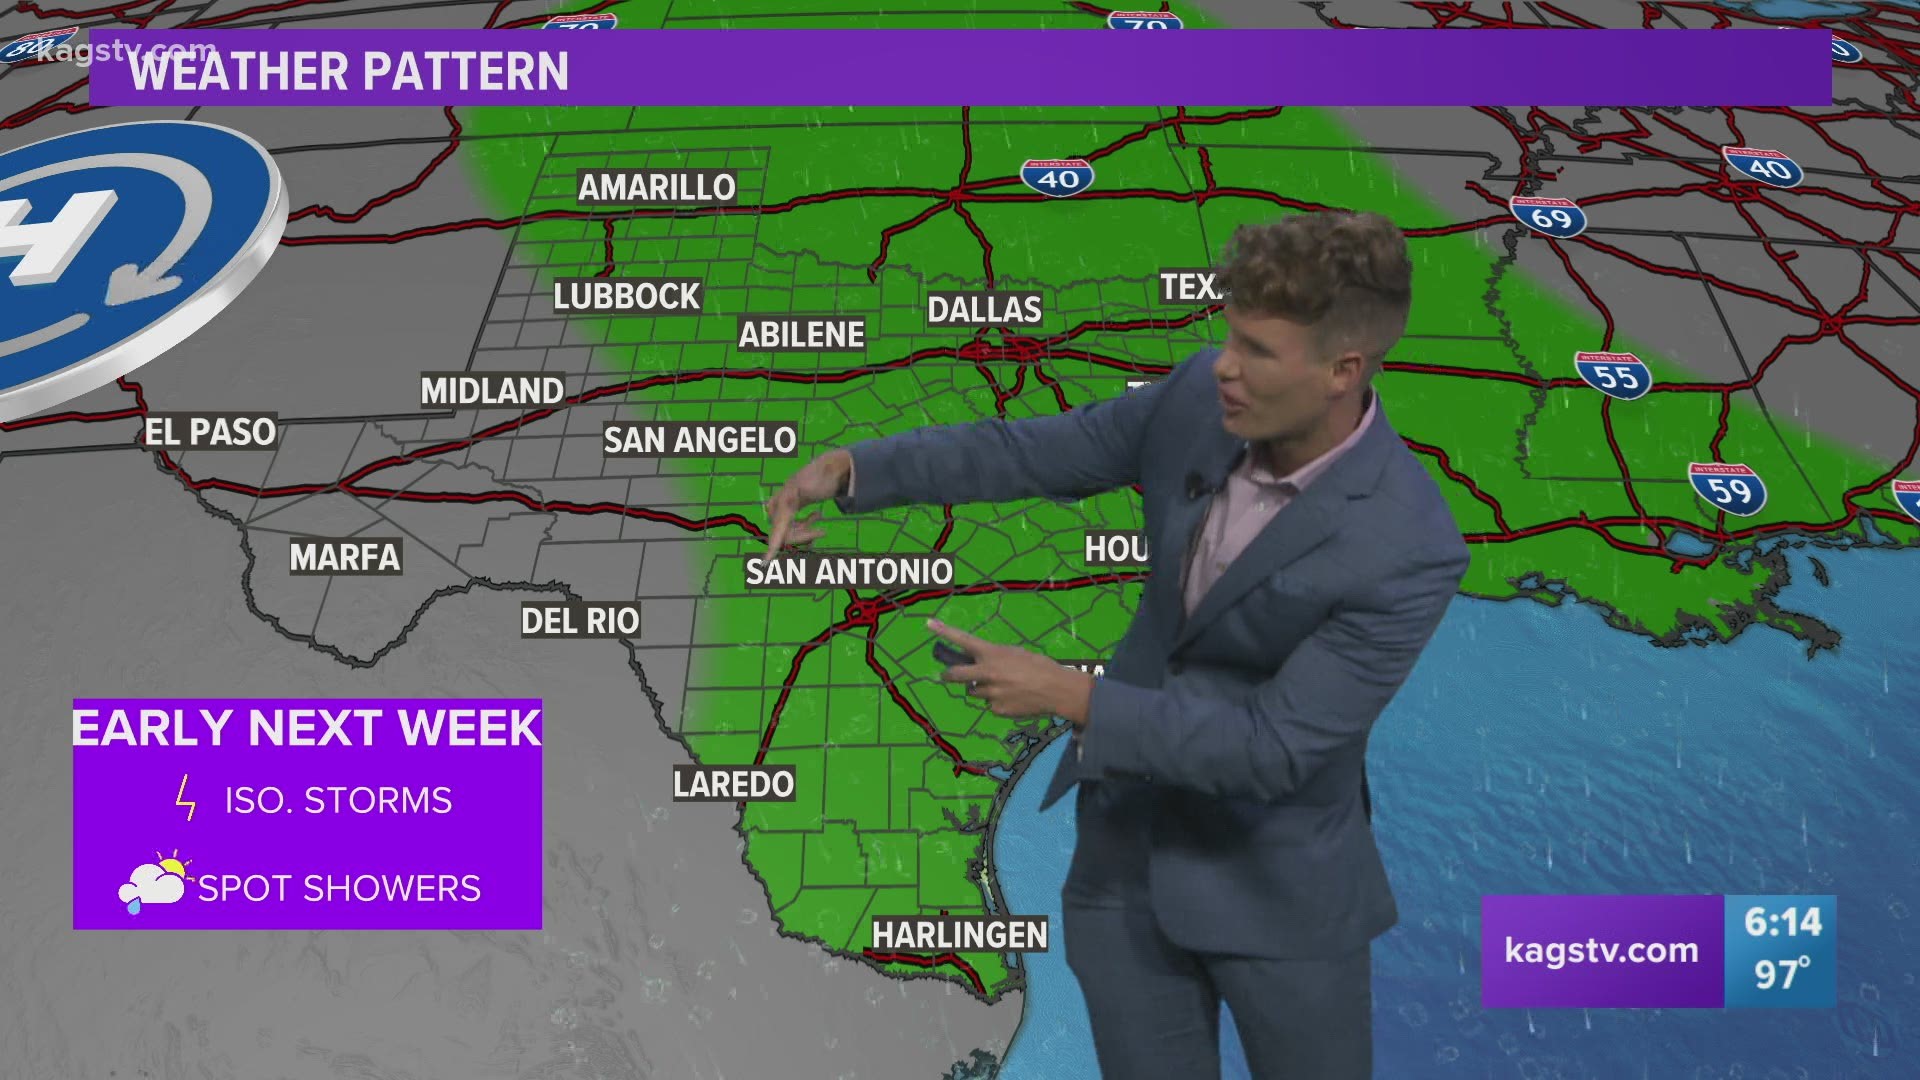 Thursday evening video forecast for the Brazos Valley